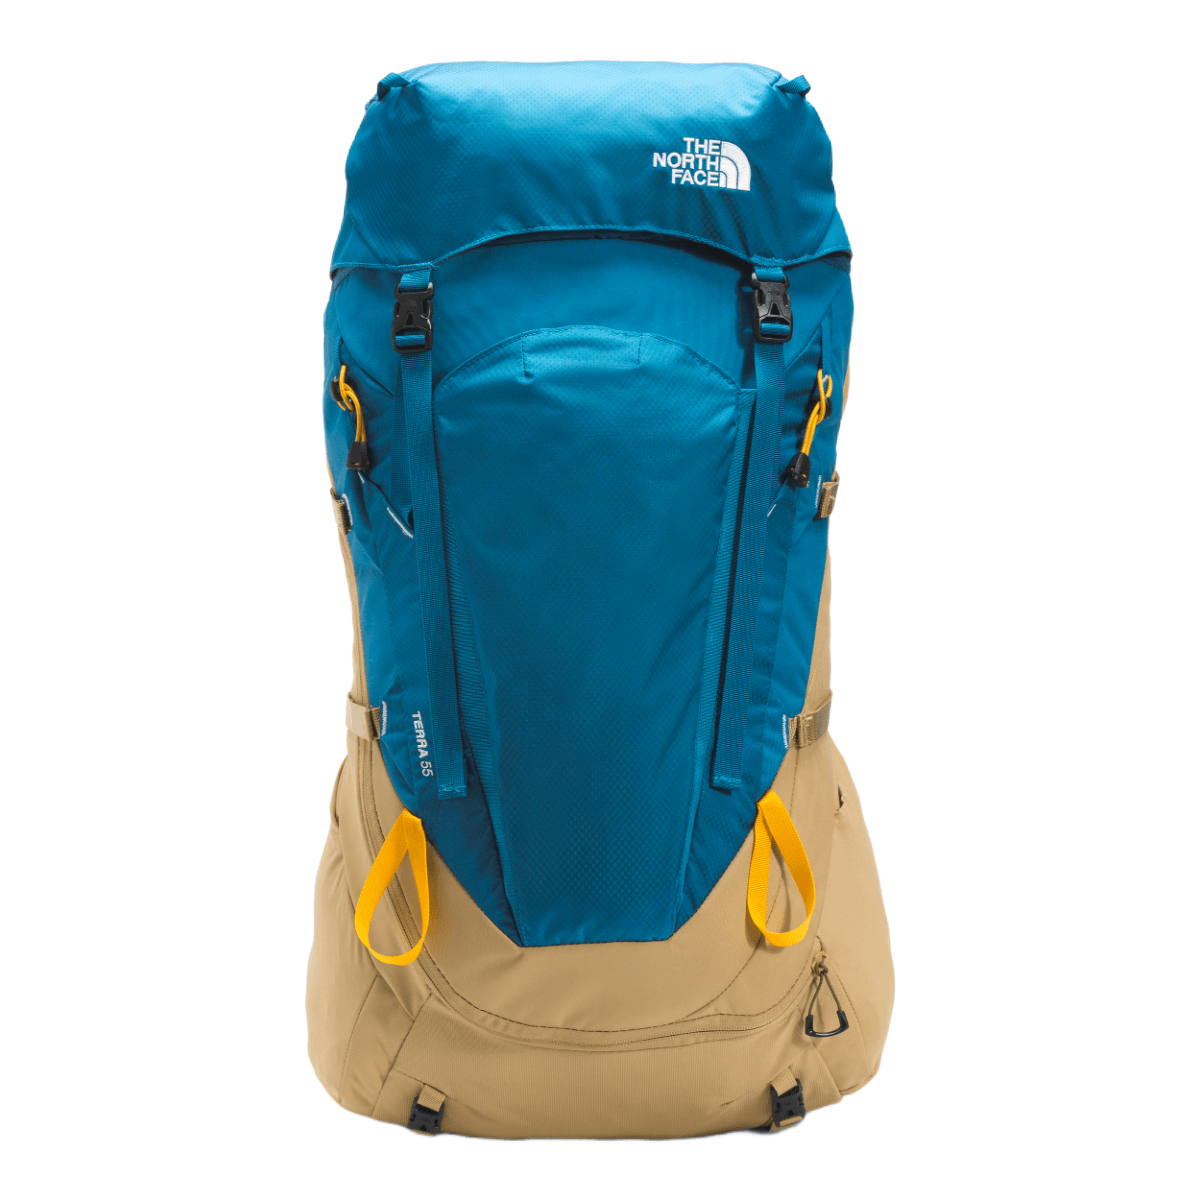 The North Face Terra 55 - -